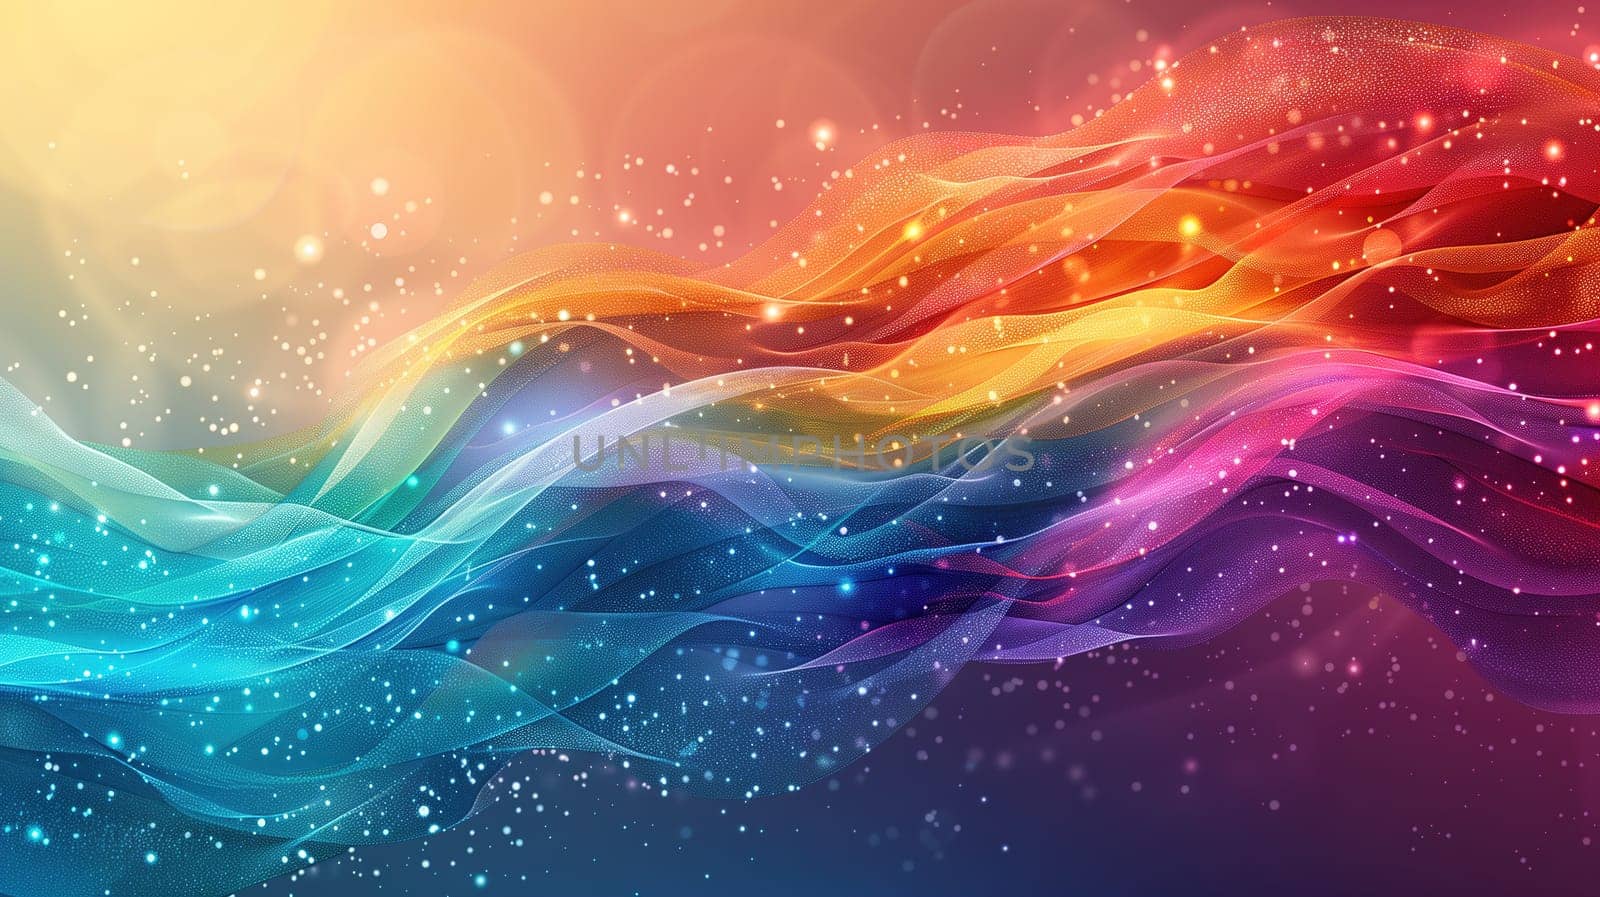 Colorful Abstract Background With Waves and Stars by TRMK